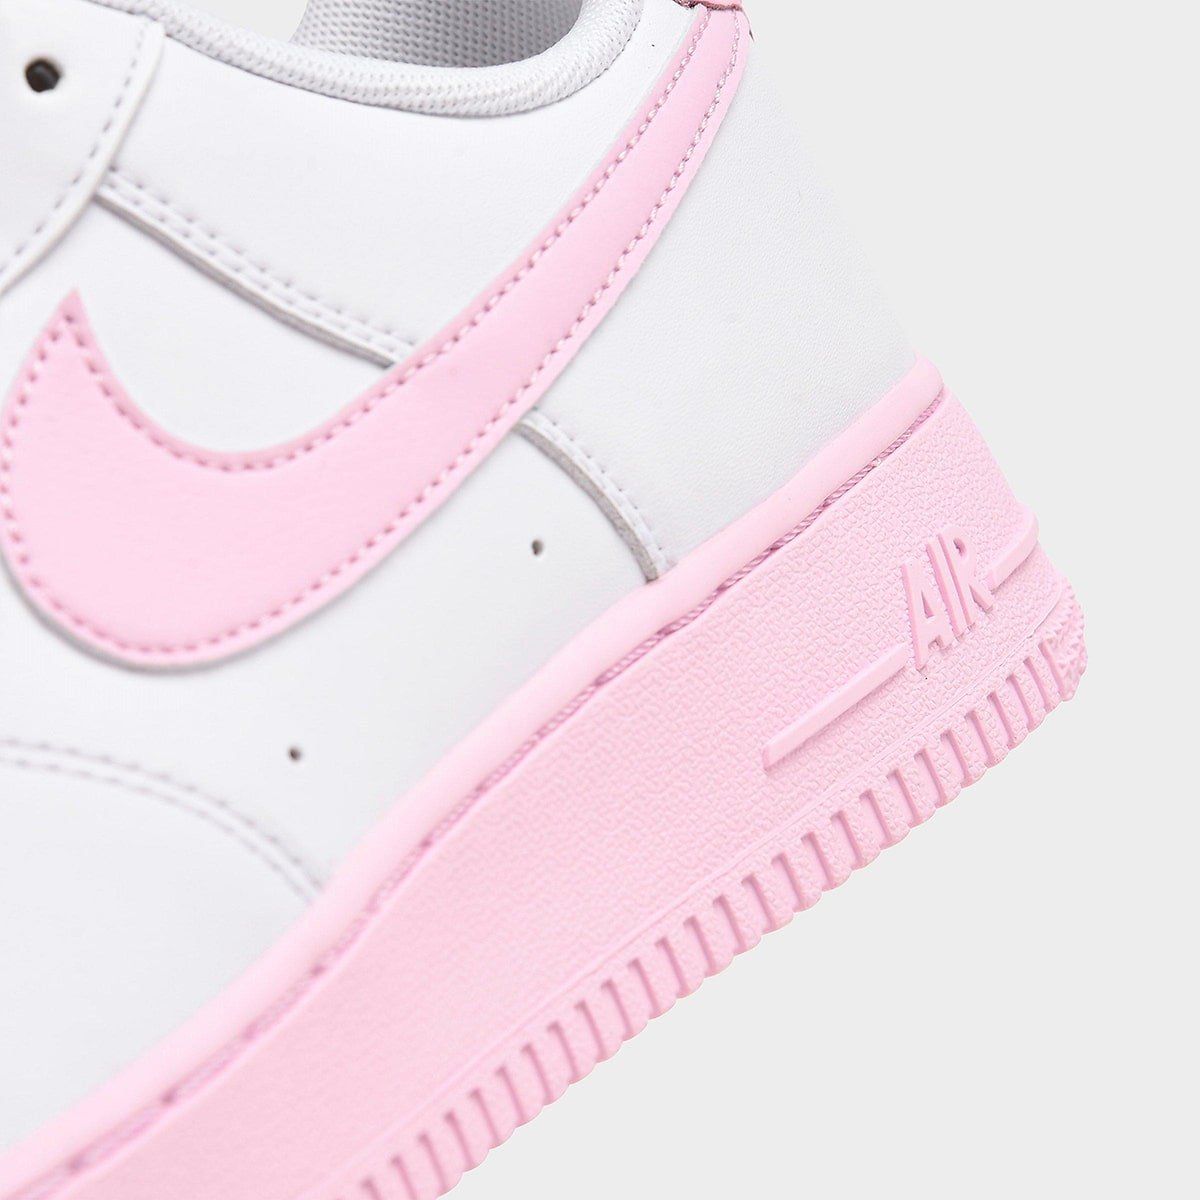 air force 1 with pink bottom